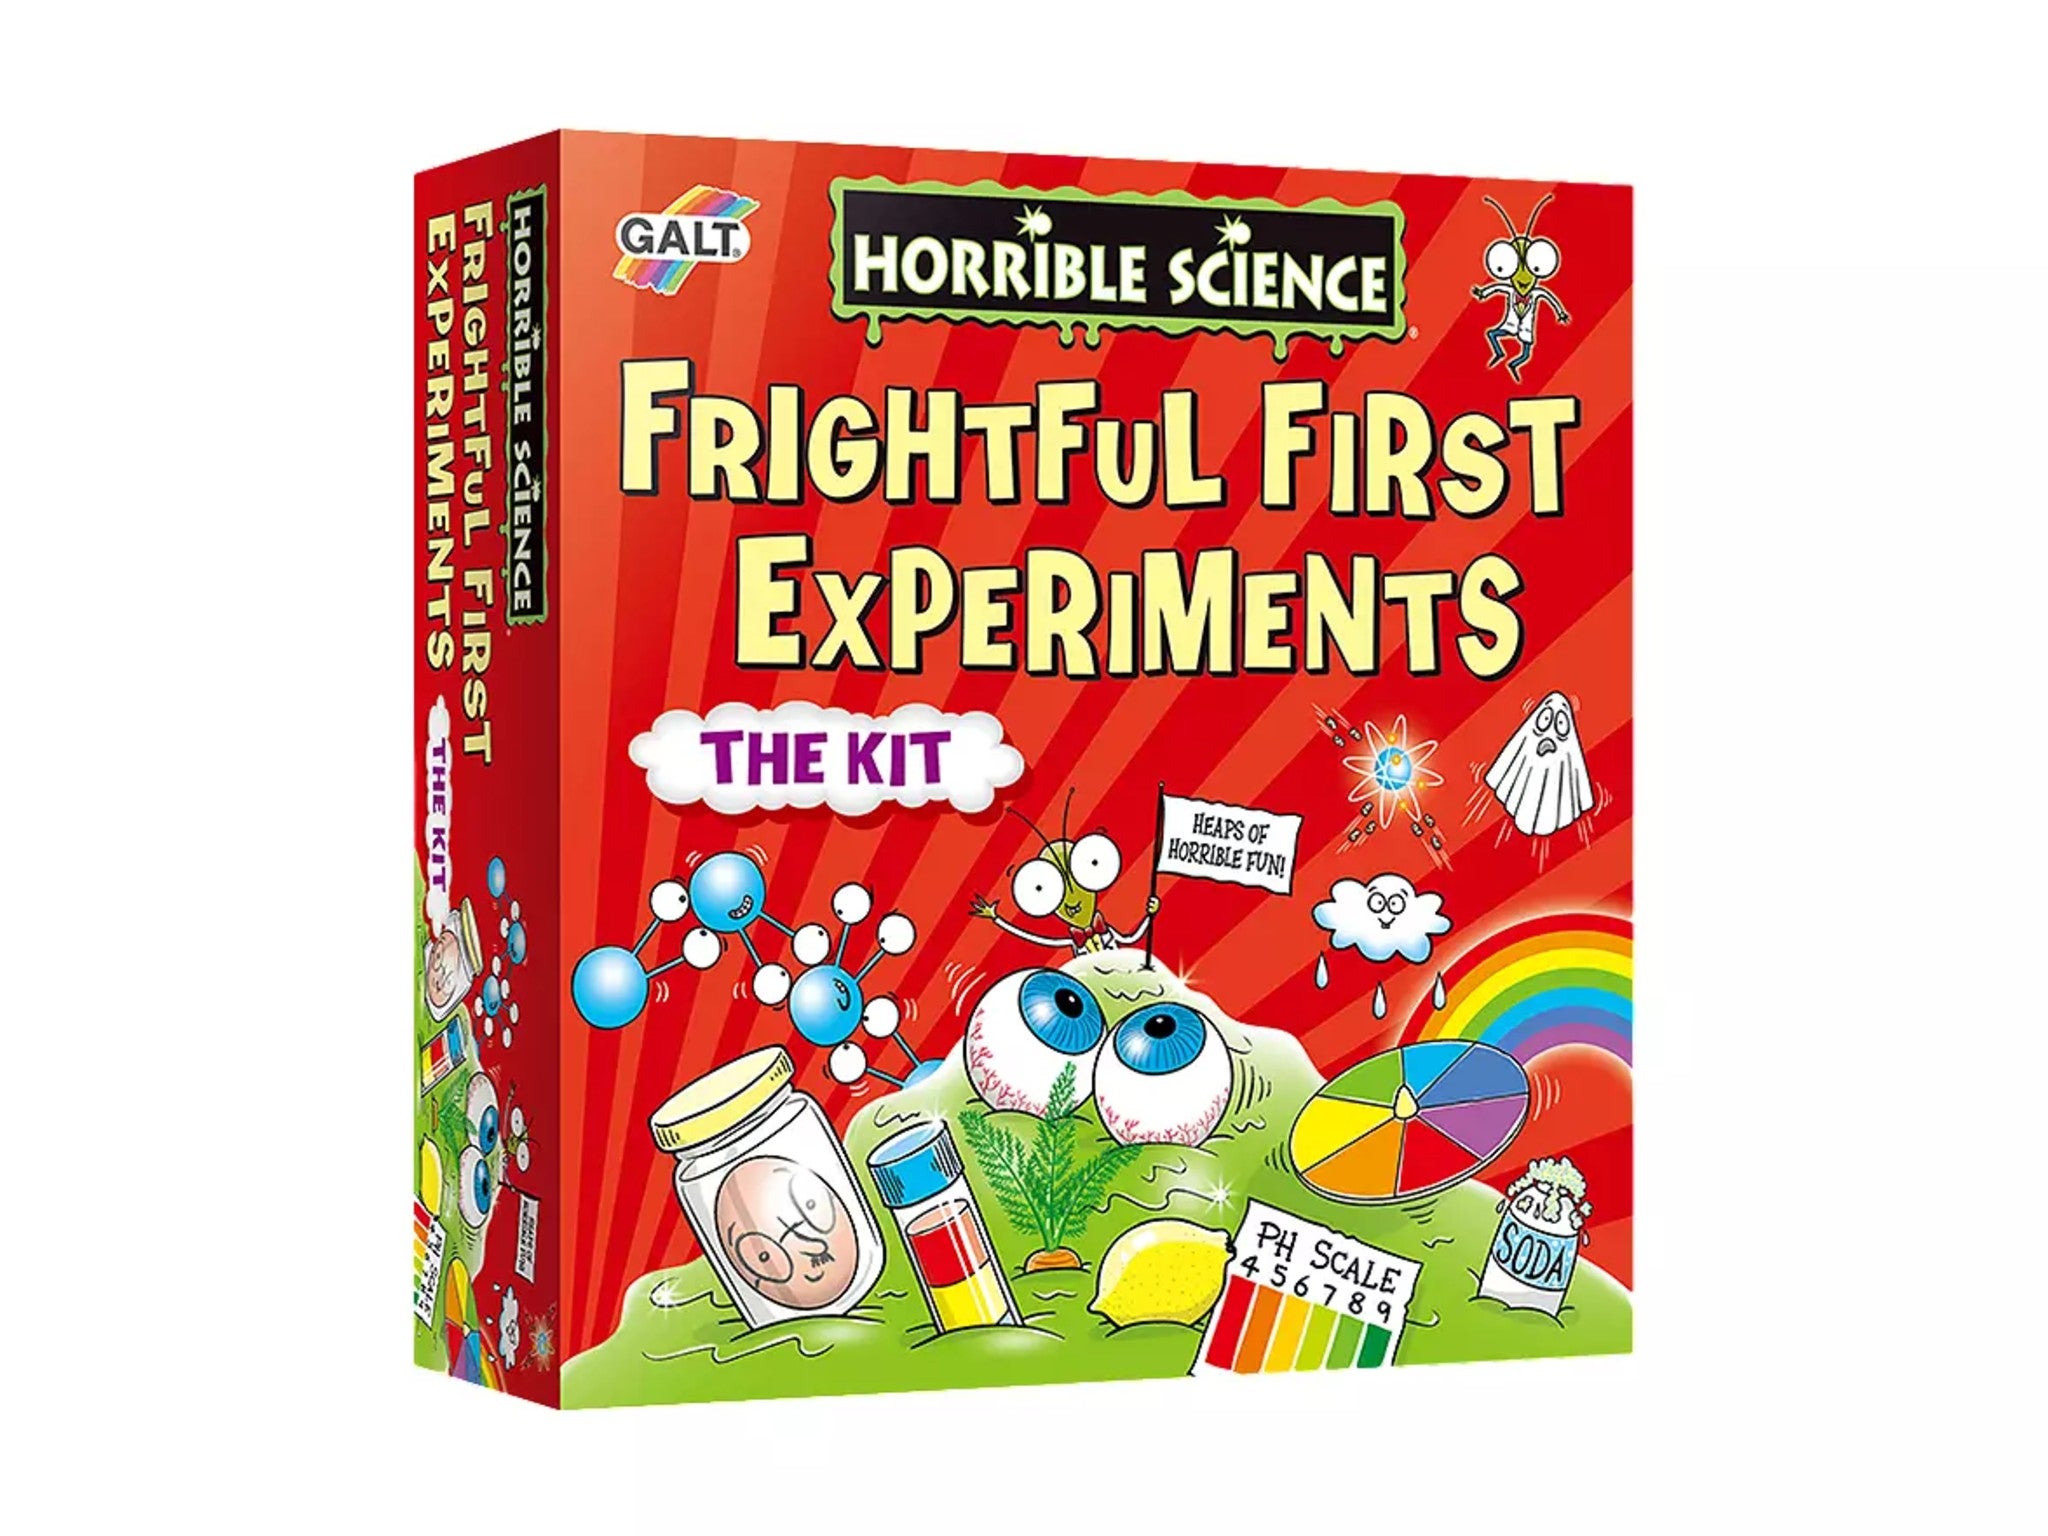 Horrible Science frightful first experiments kit indybest.jpg